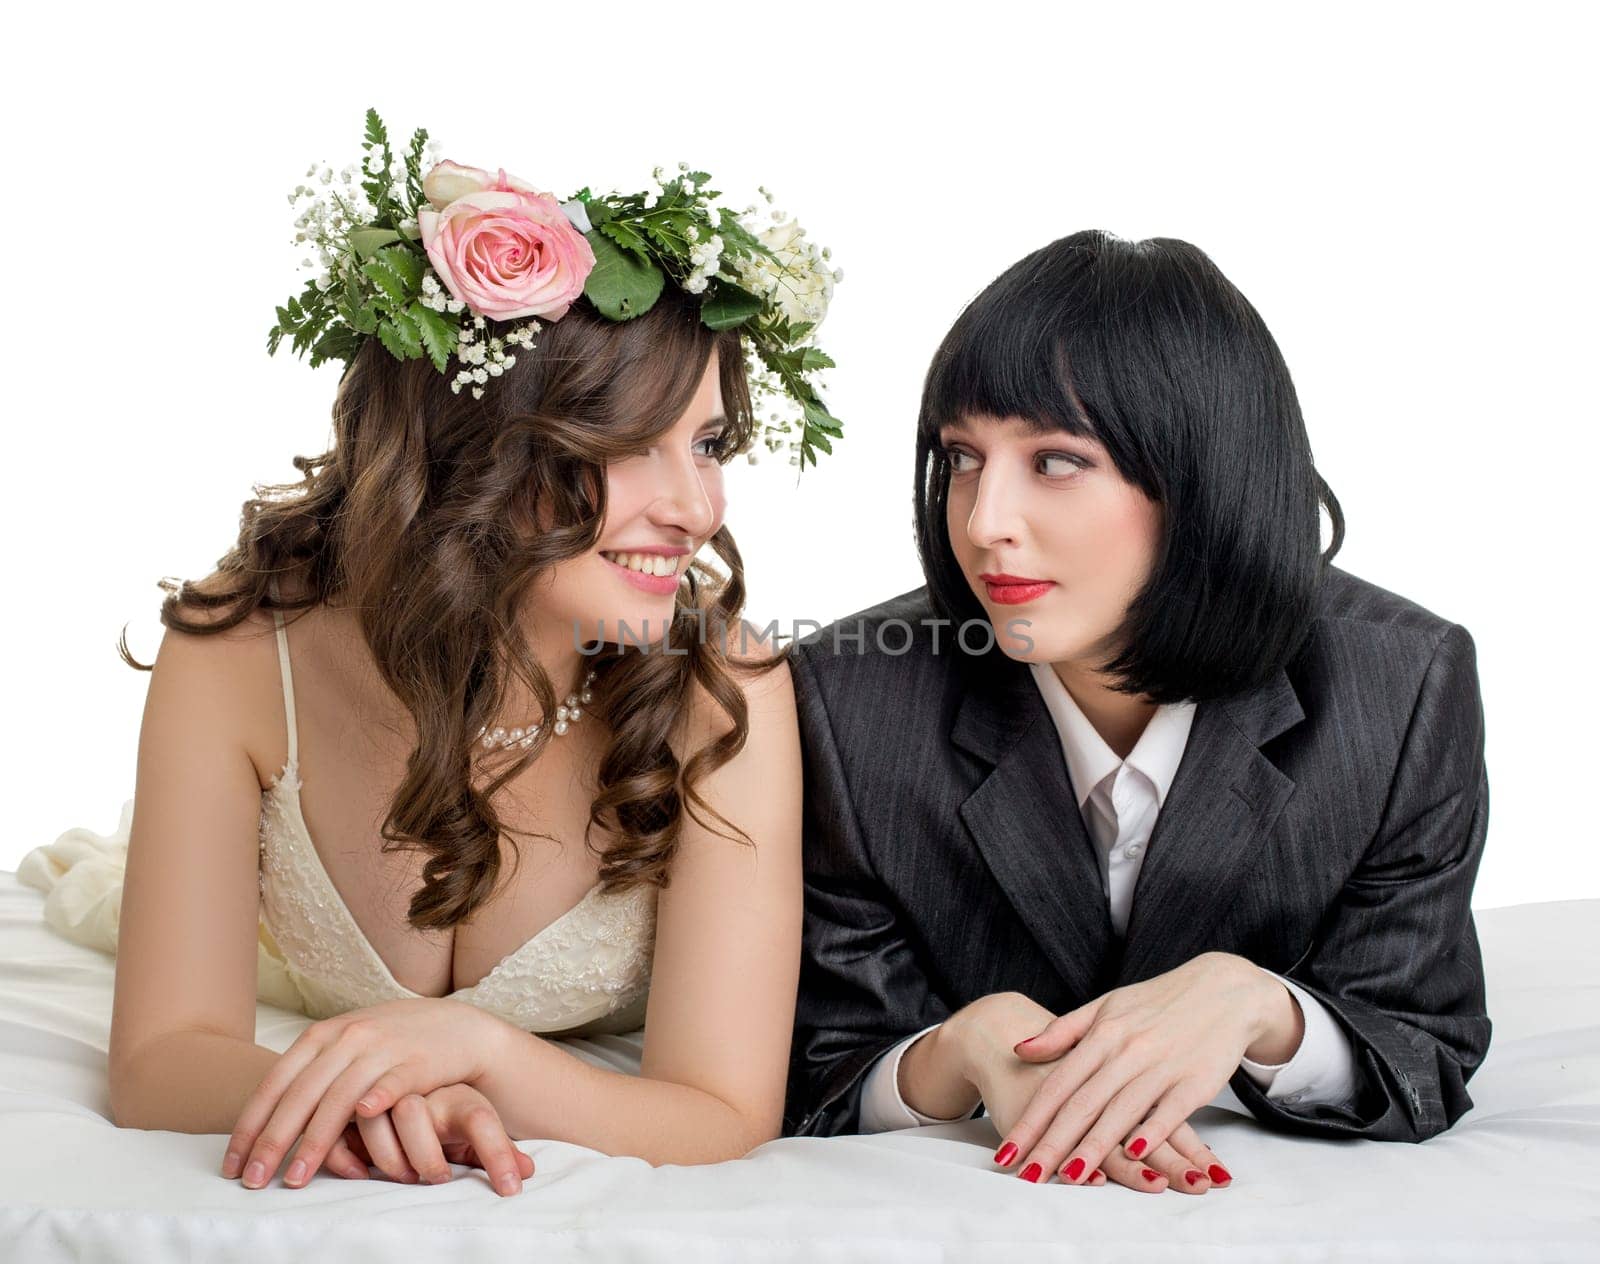 Same-sex marriage. Studio photo of girls dressed as bride and groom